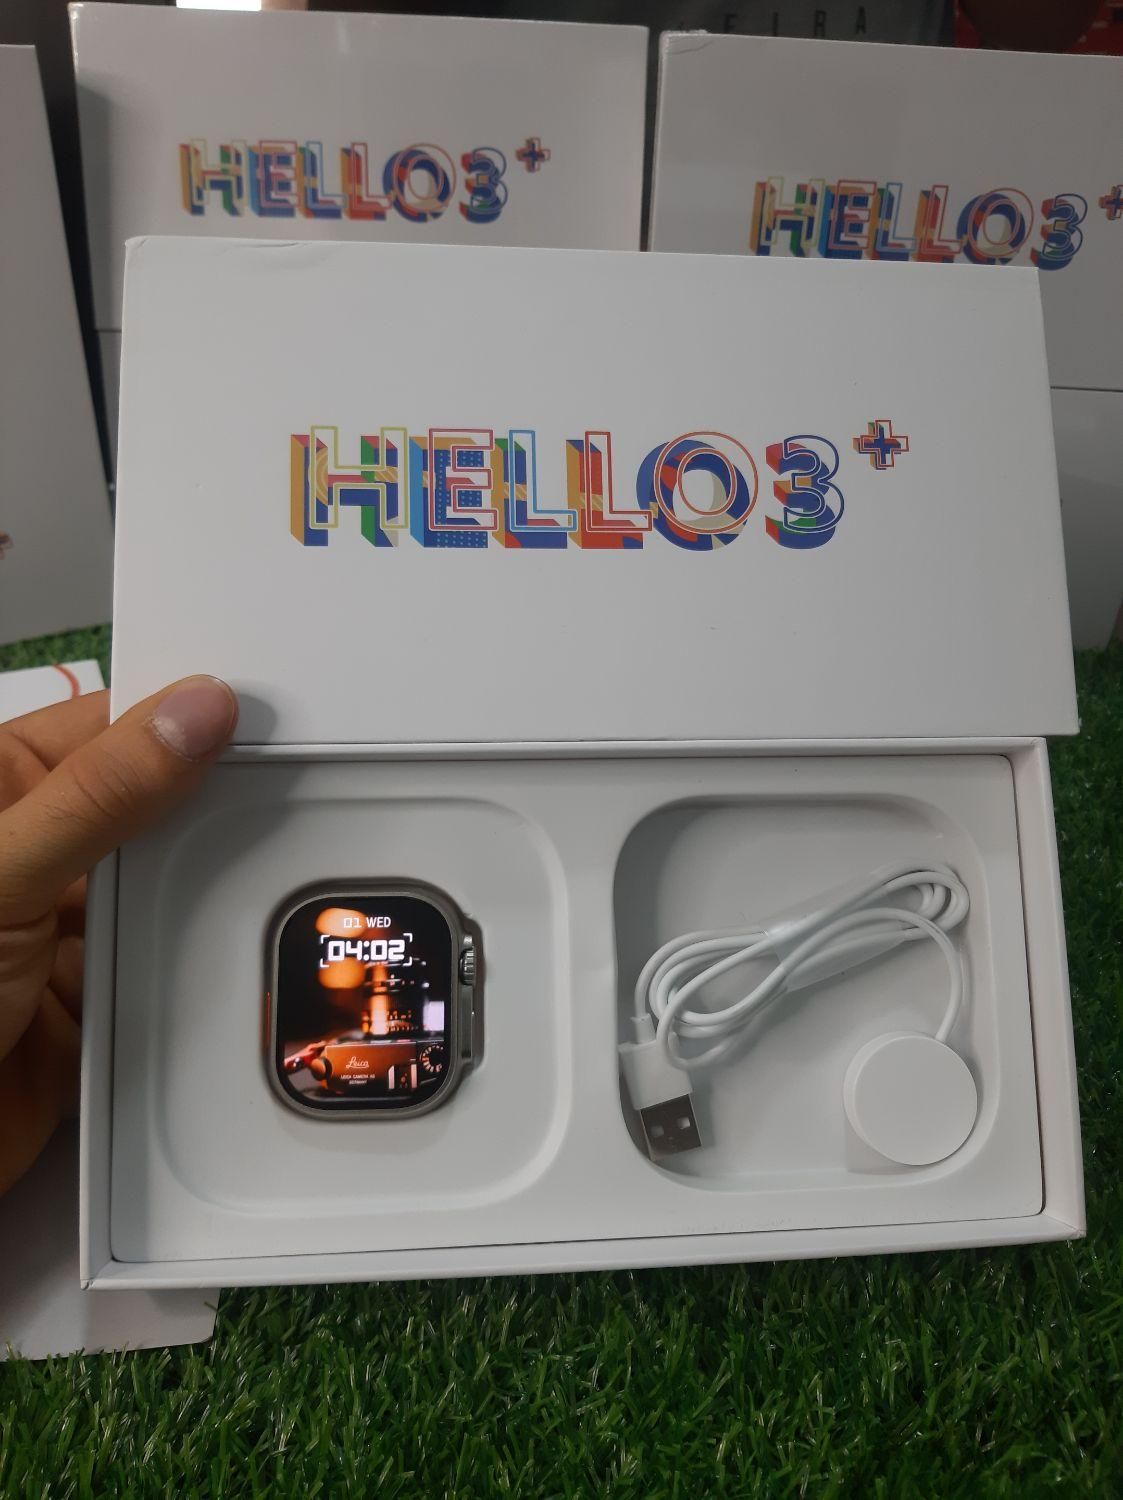 Hello Watch 3 Plus Ultra Smartwatch A Comprehensive Review